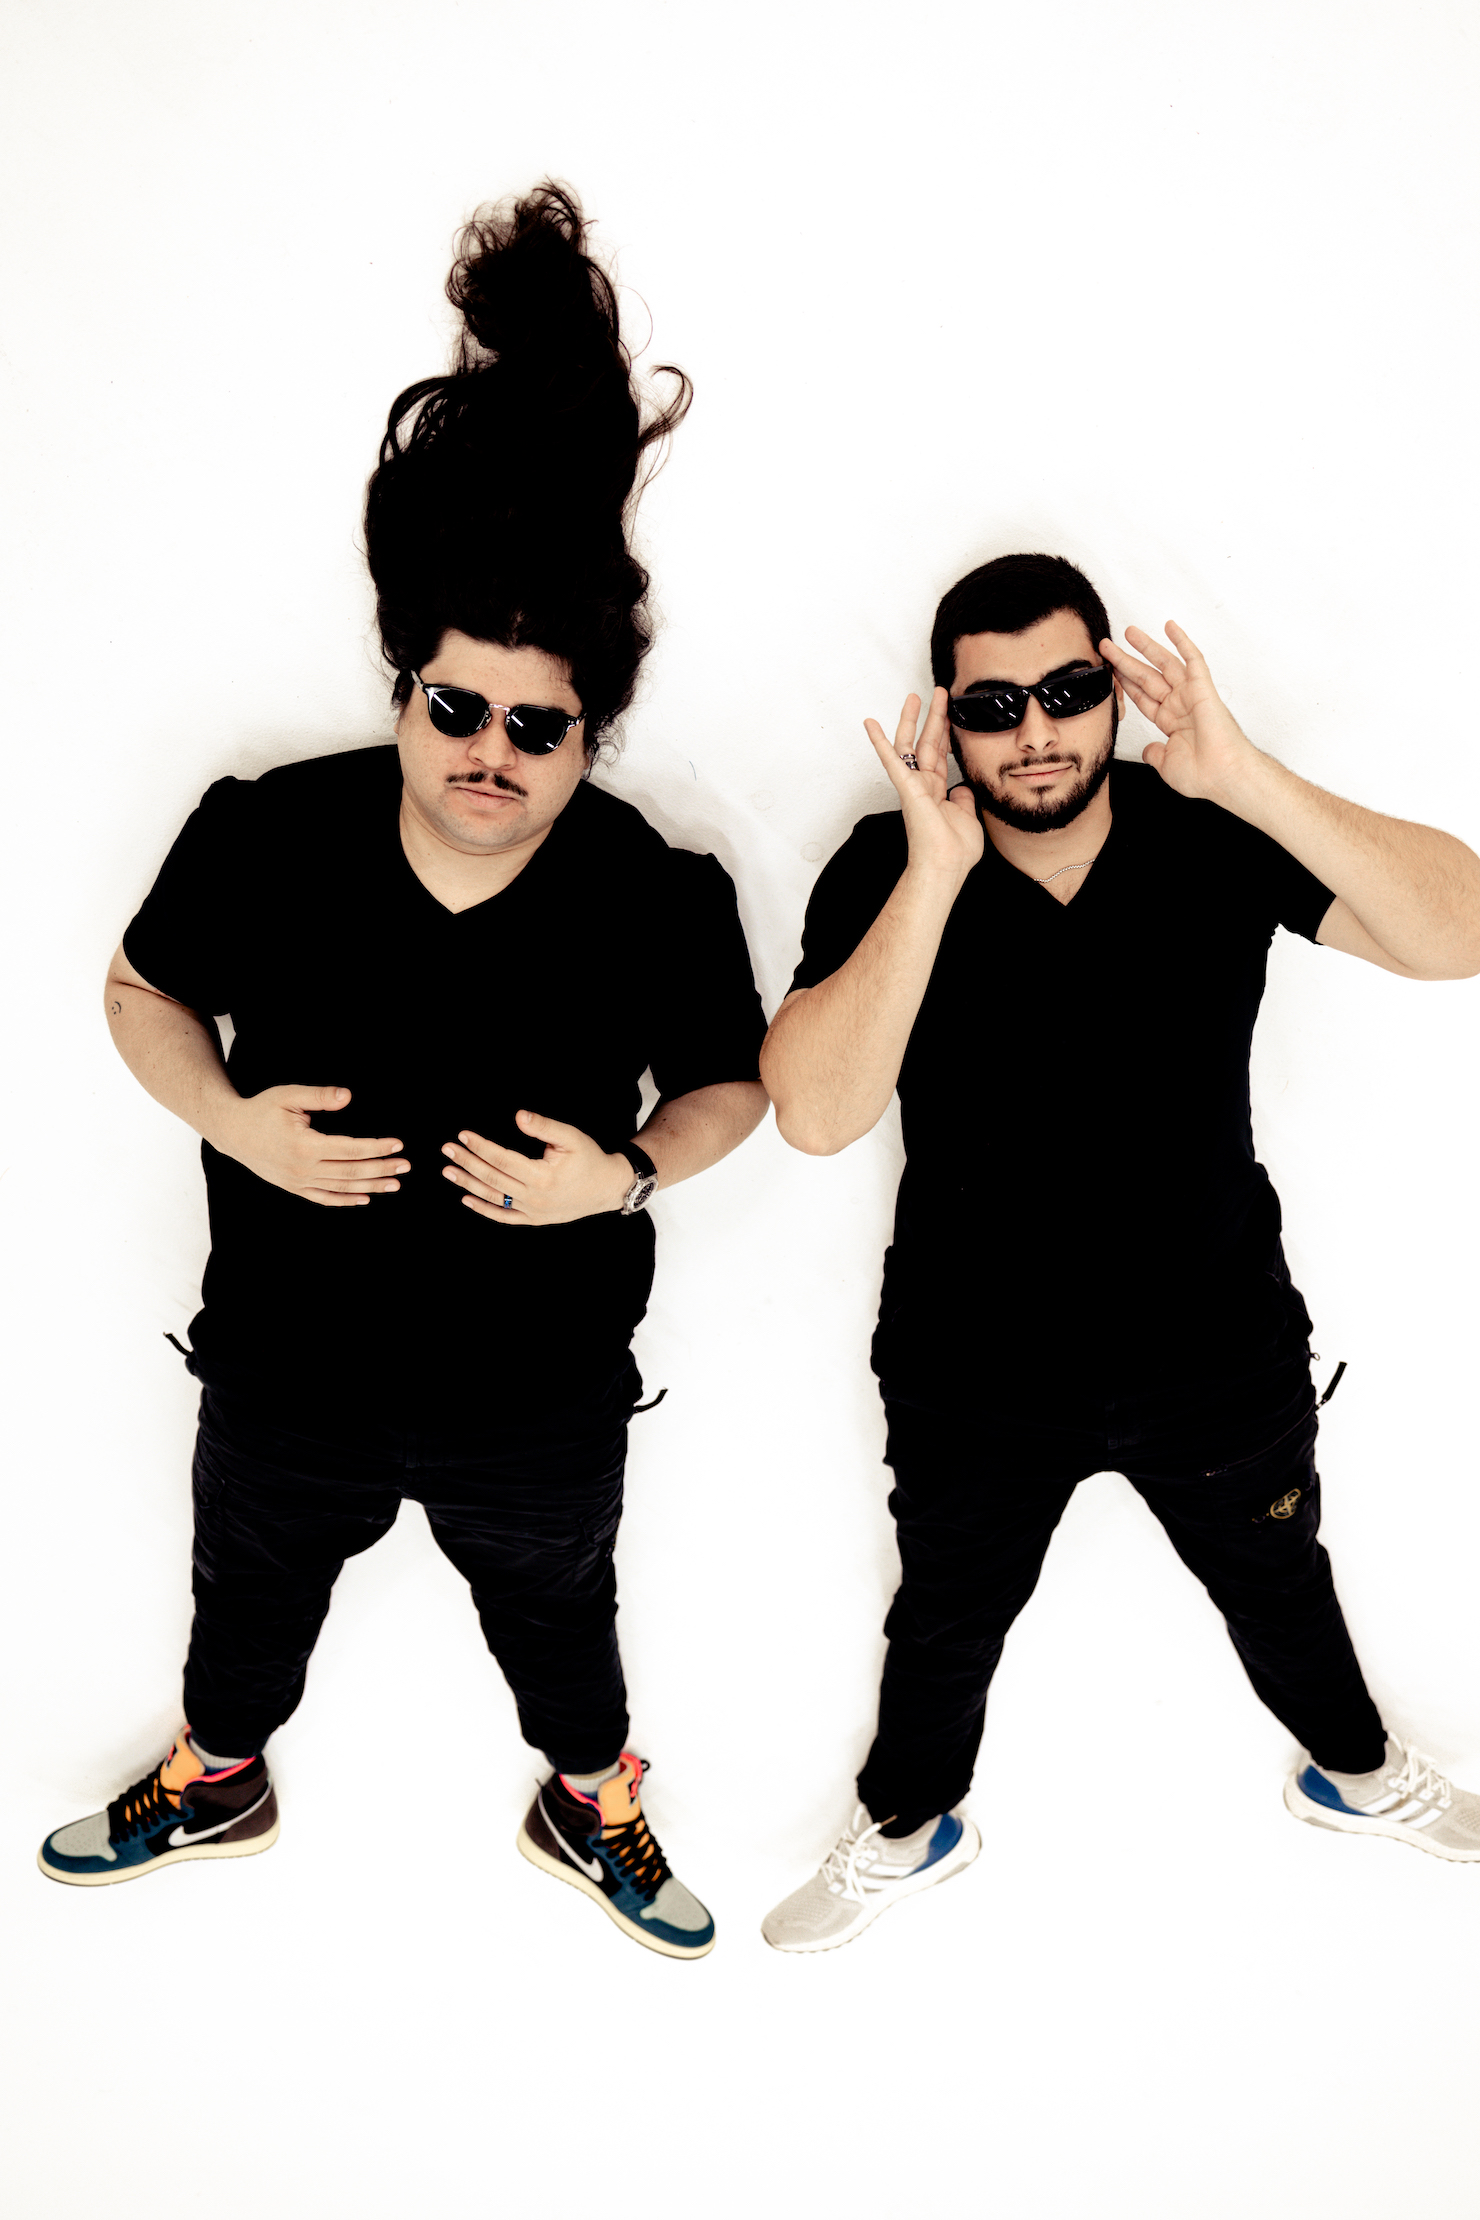 Black V Neck Team Up Again With Afrojack For Rumbling Single, “Oral Music”